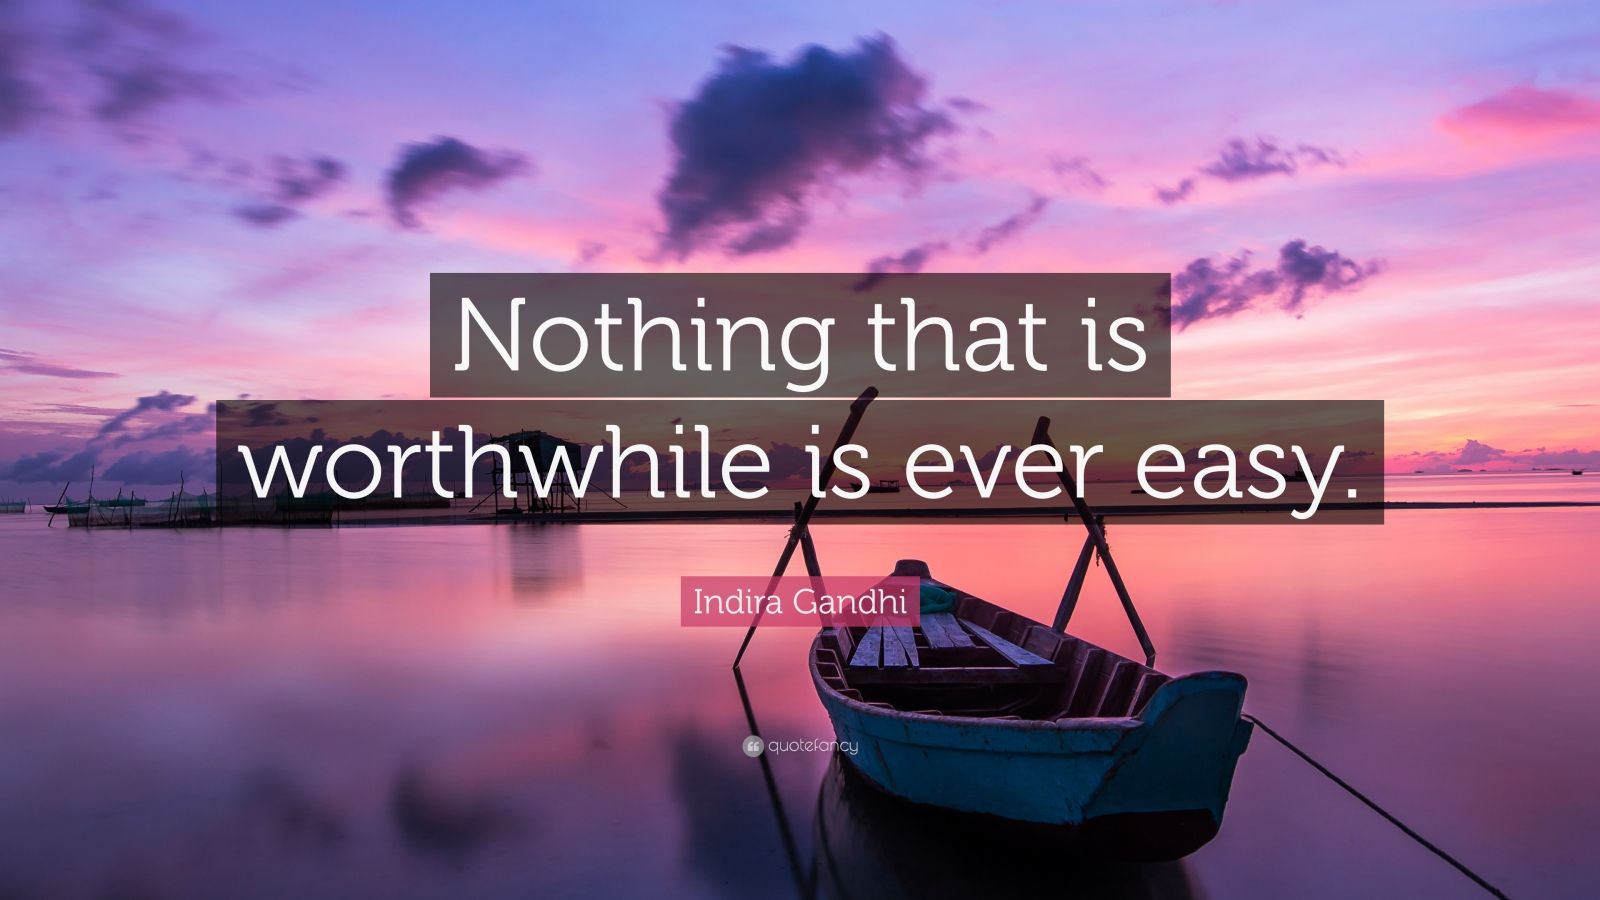 Indira Gandhi Quote: “Nothing that is worthwhile is ever easy.” (12